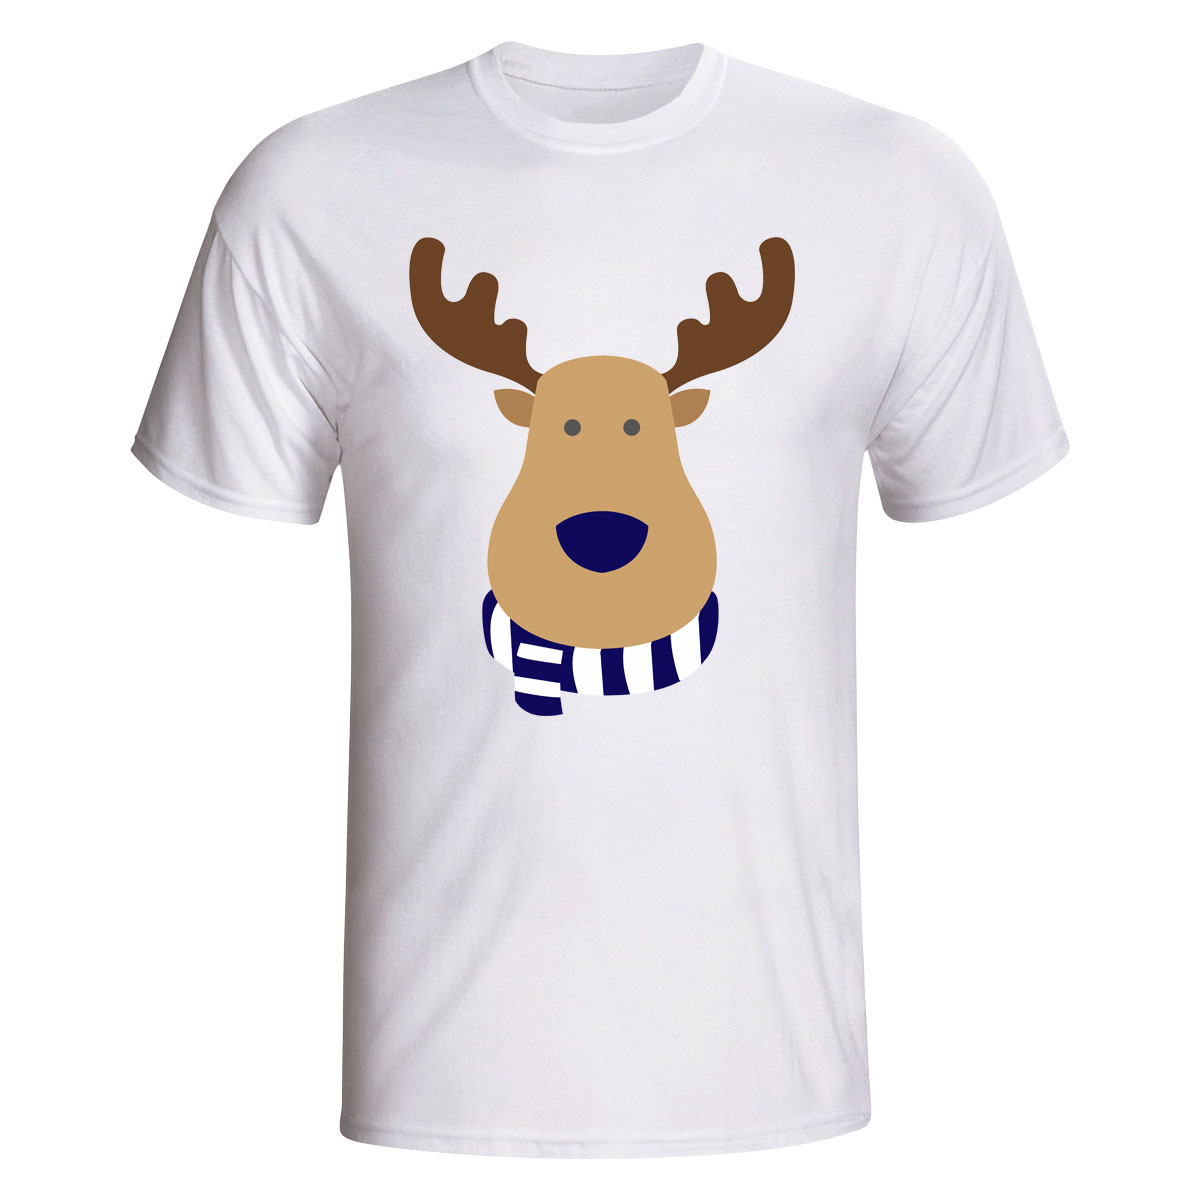 Bolton Rudolph Supporters T-shirt (white) - Kids